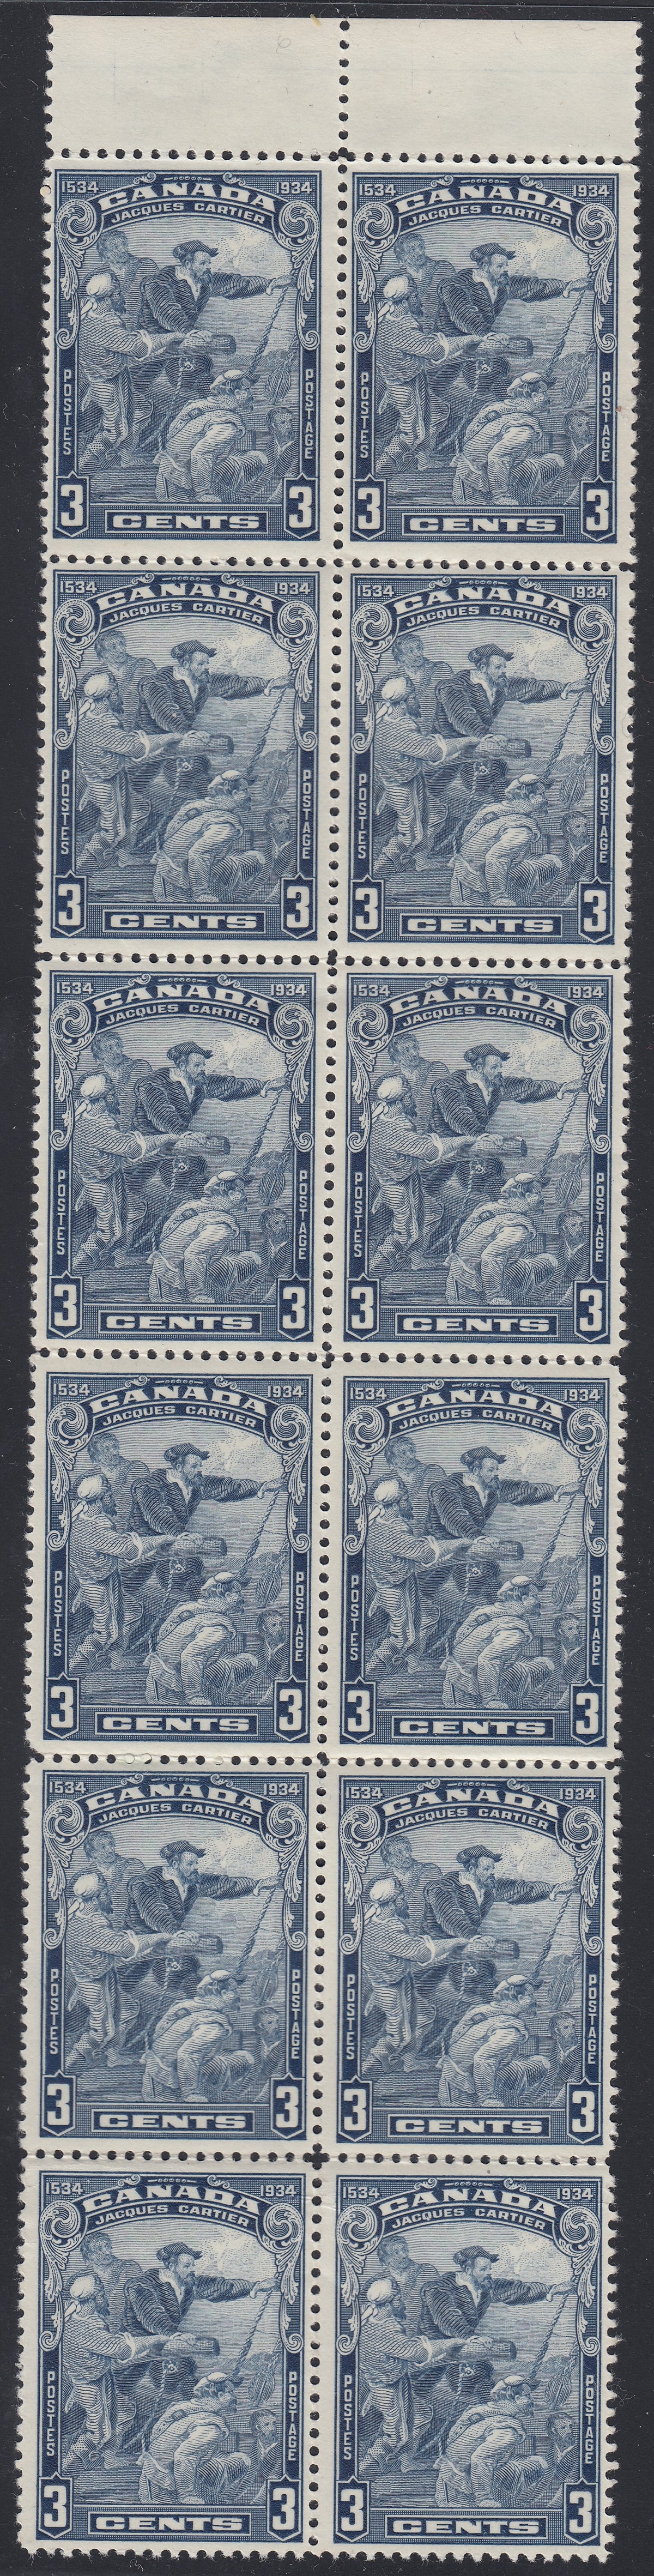 0208CA1802 - Canada #208 - Mint Block of 12 &#39;Topless 4&#39; Unlisted Variety